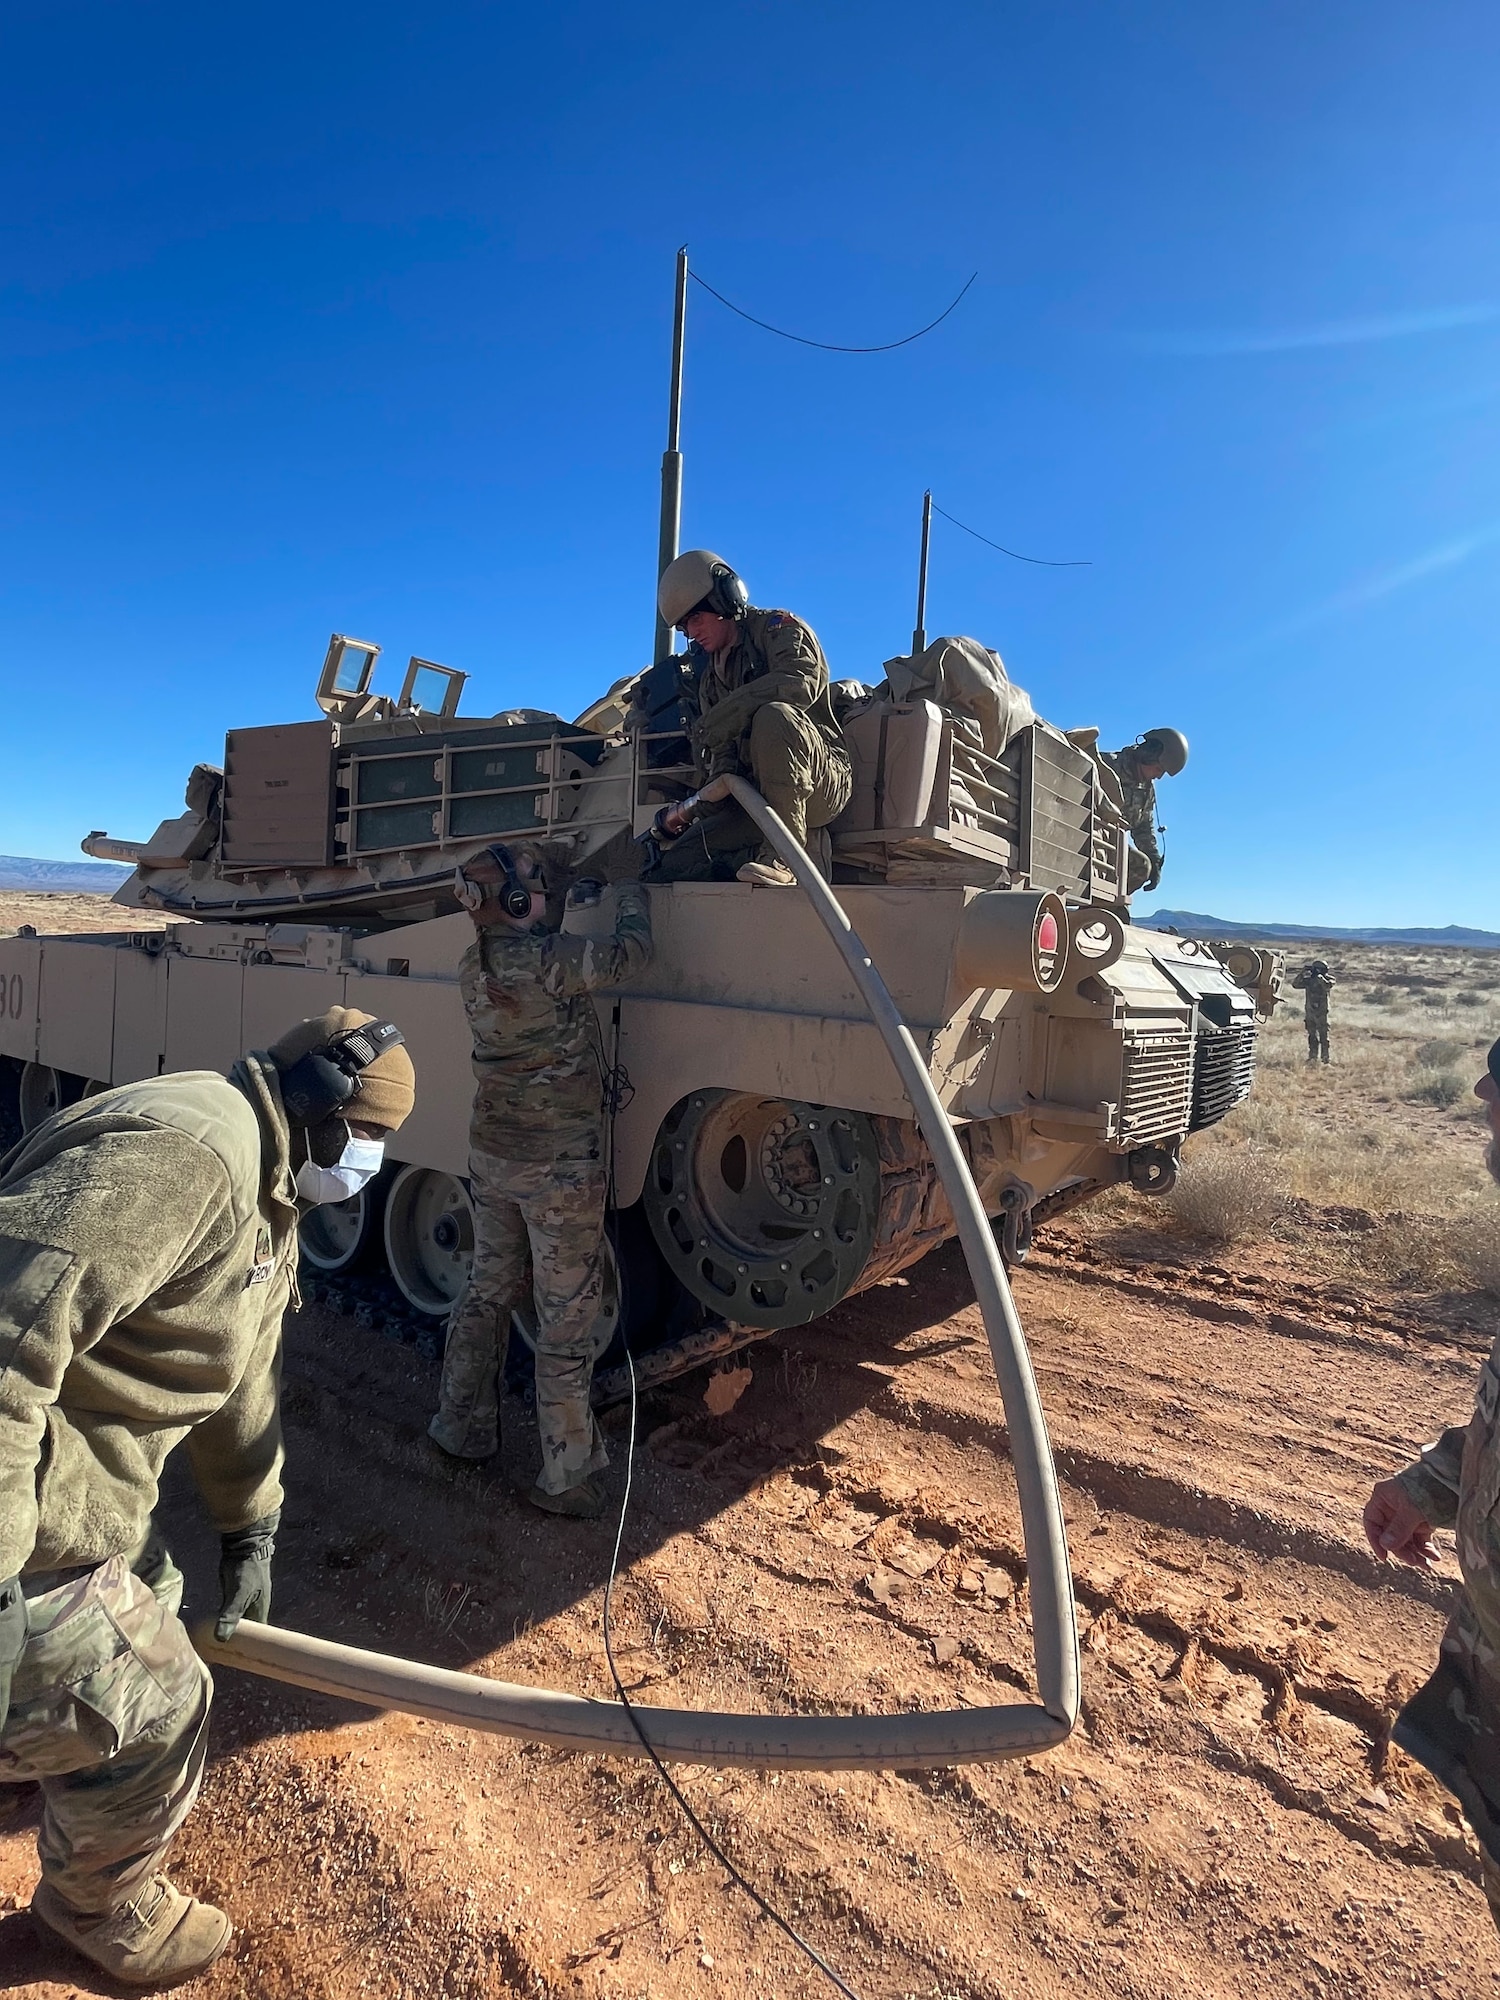 U.S. Army Soldiers assigned to the 1st Armored Division connect a fuel hose to an M1A2 Abrams Tank at Fort Bliss, Texas, Jan. 25, 2023. The 317th Airlift Wing executed an Agile Combat Employment exercise by sending a C-130 to the Fort Bliss Range to perform Specialized Fueling Operations with the 3rd Brigade Combat Team, 1st AD and the 1st Battalion, 77th Armored Regiment. The units successfully passed fuel from a C-130 to an M1A2 Abrams Tank utilizing an Emergency Response Refueling Equipment Kit, marking the first time in Air Force history that a C-130 has been used to refuel an Abrams tank. (Courtesy photo)